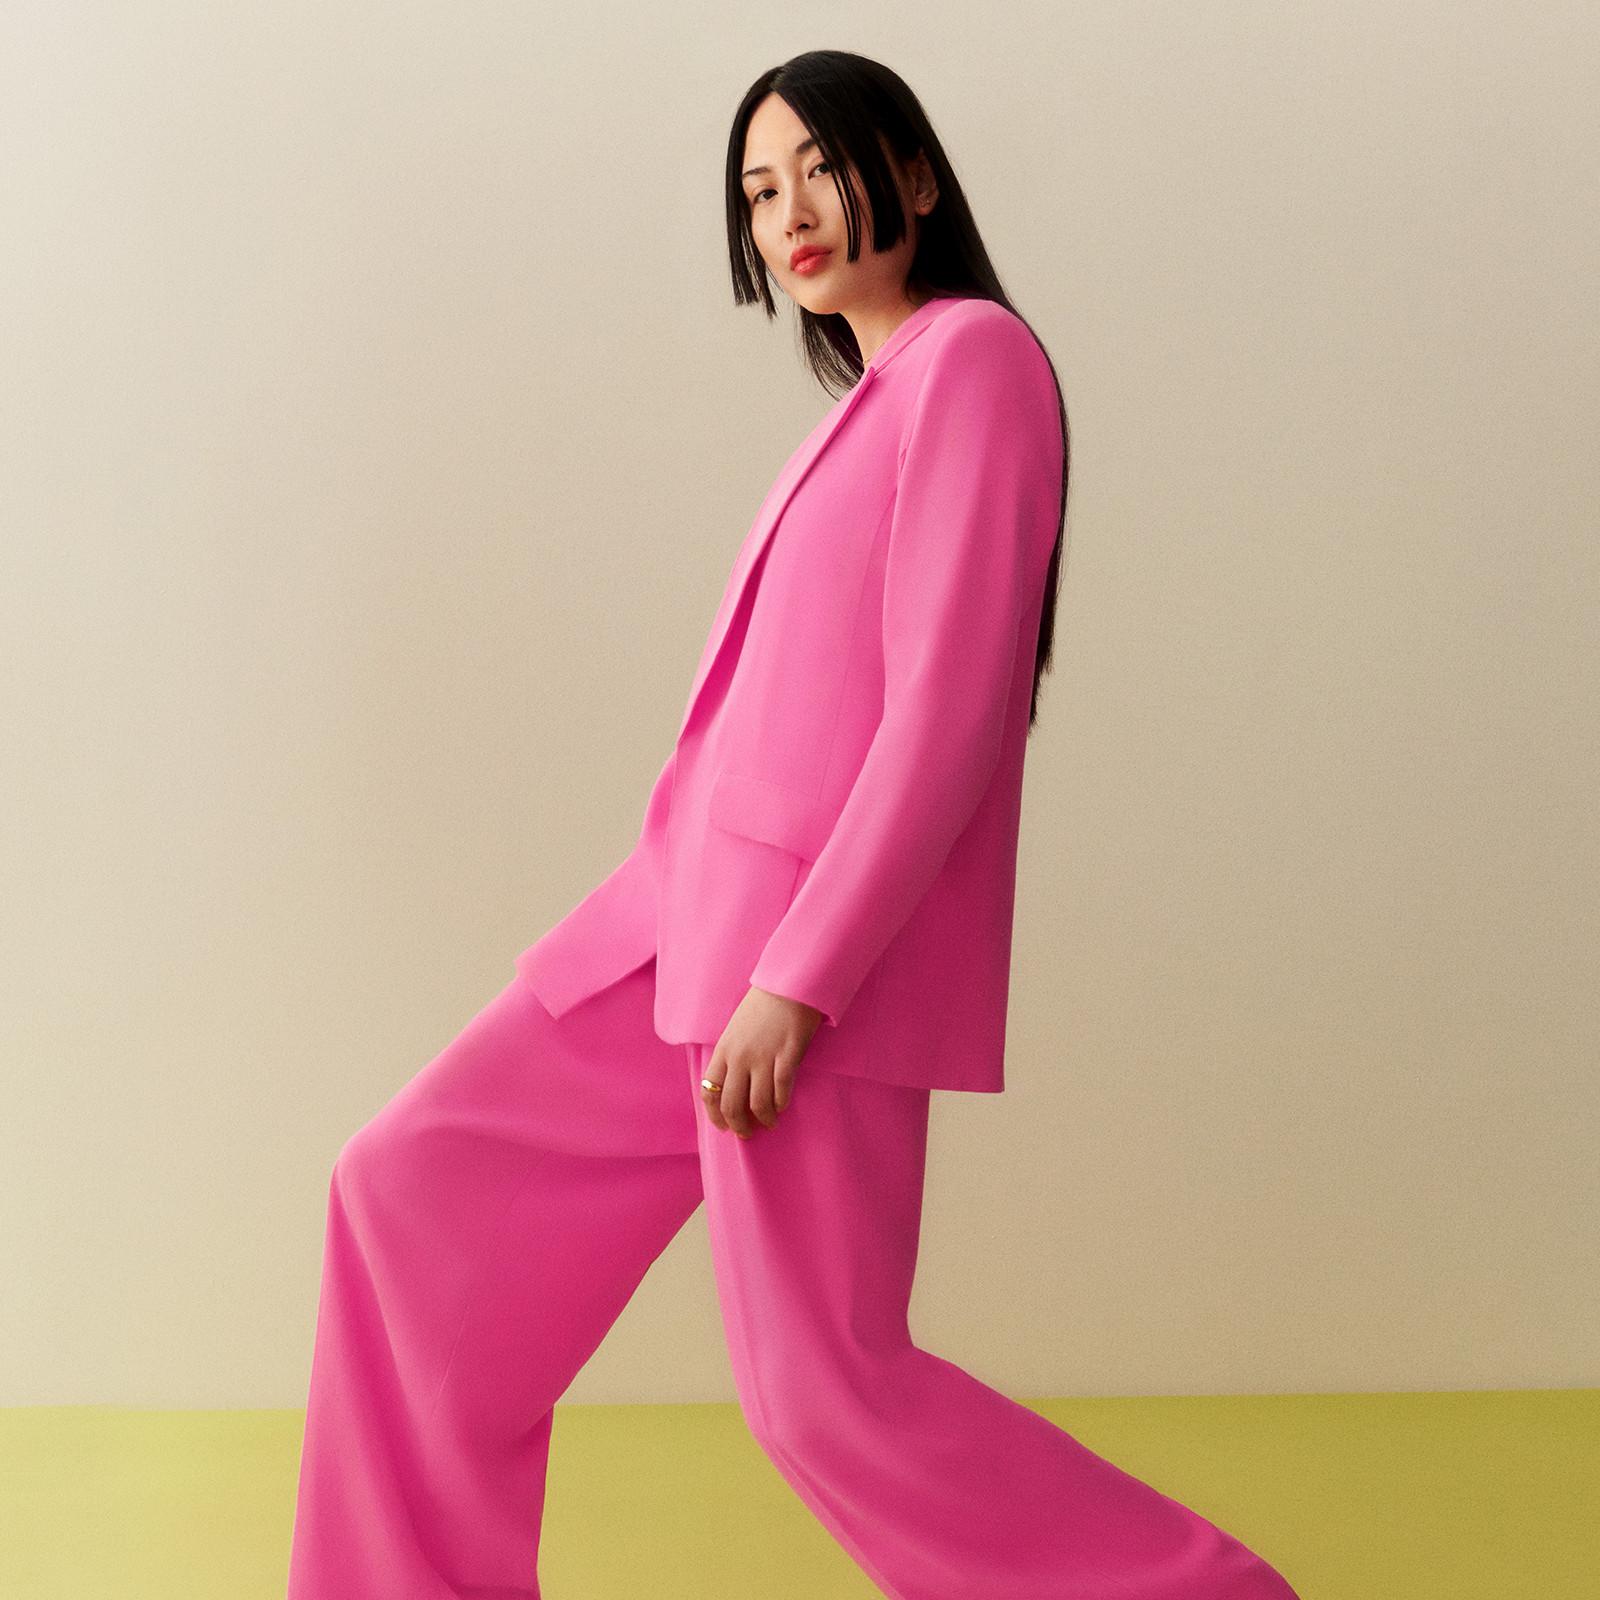 Model wearing a pink suit